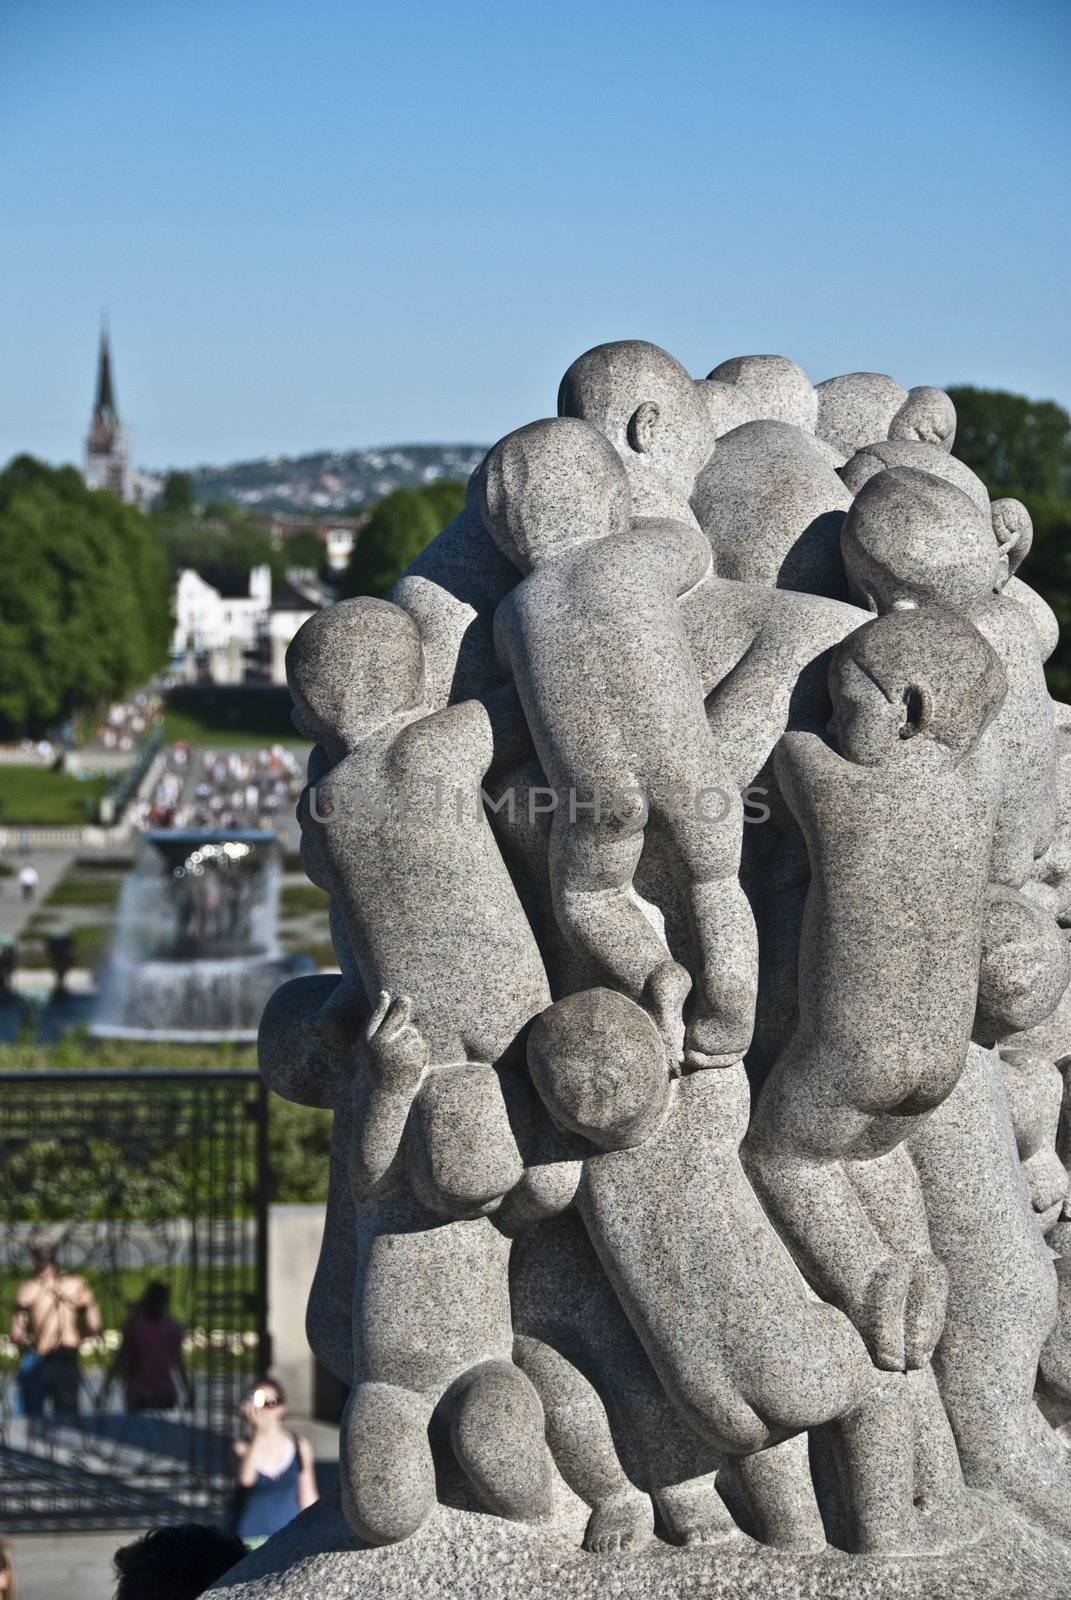 Statue in a Park of Oslo, Norway, May 2009 by jovannig